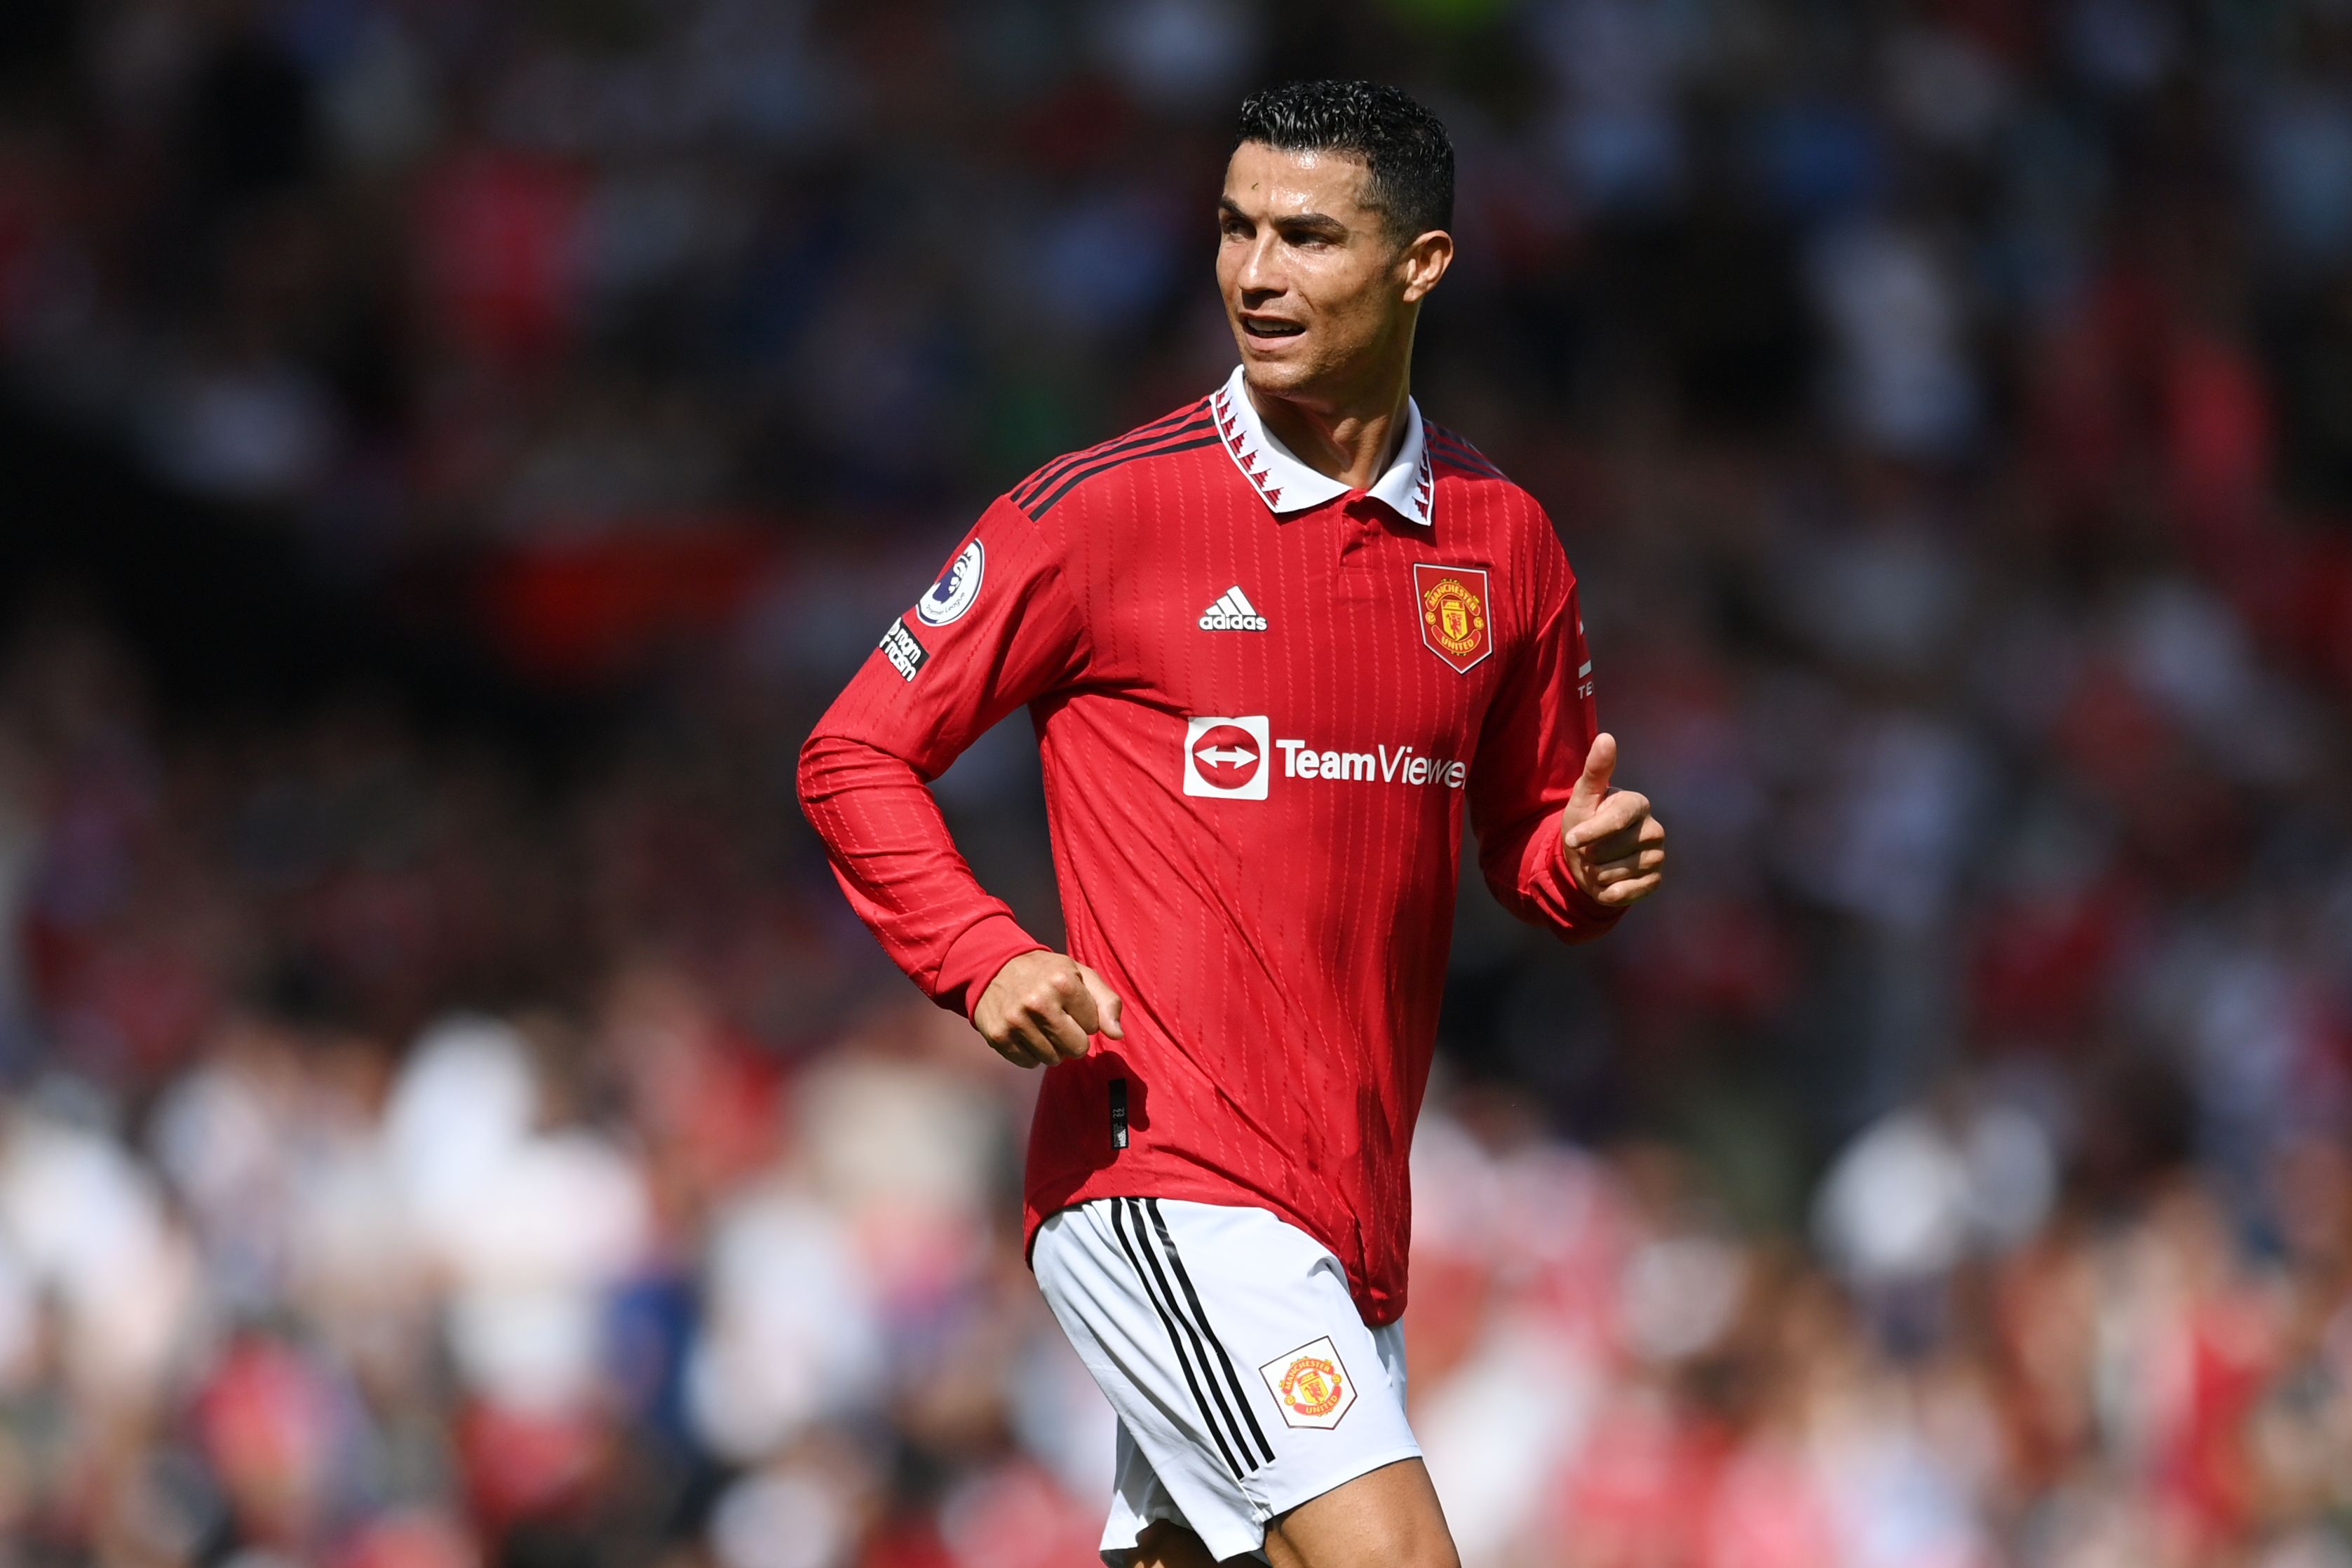 Cristiano Ronaldo of Manchester United in action